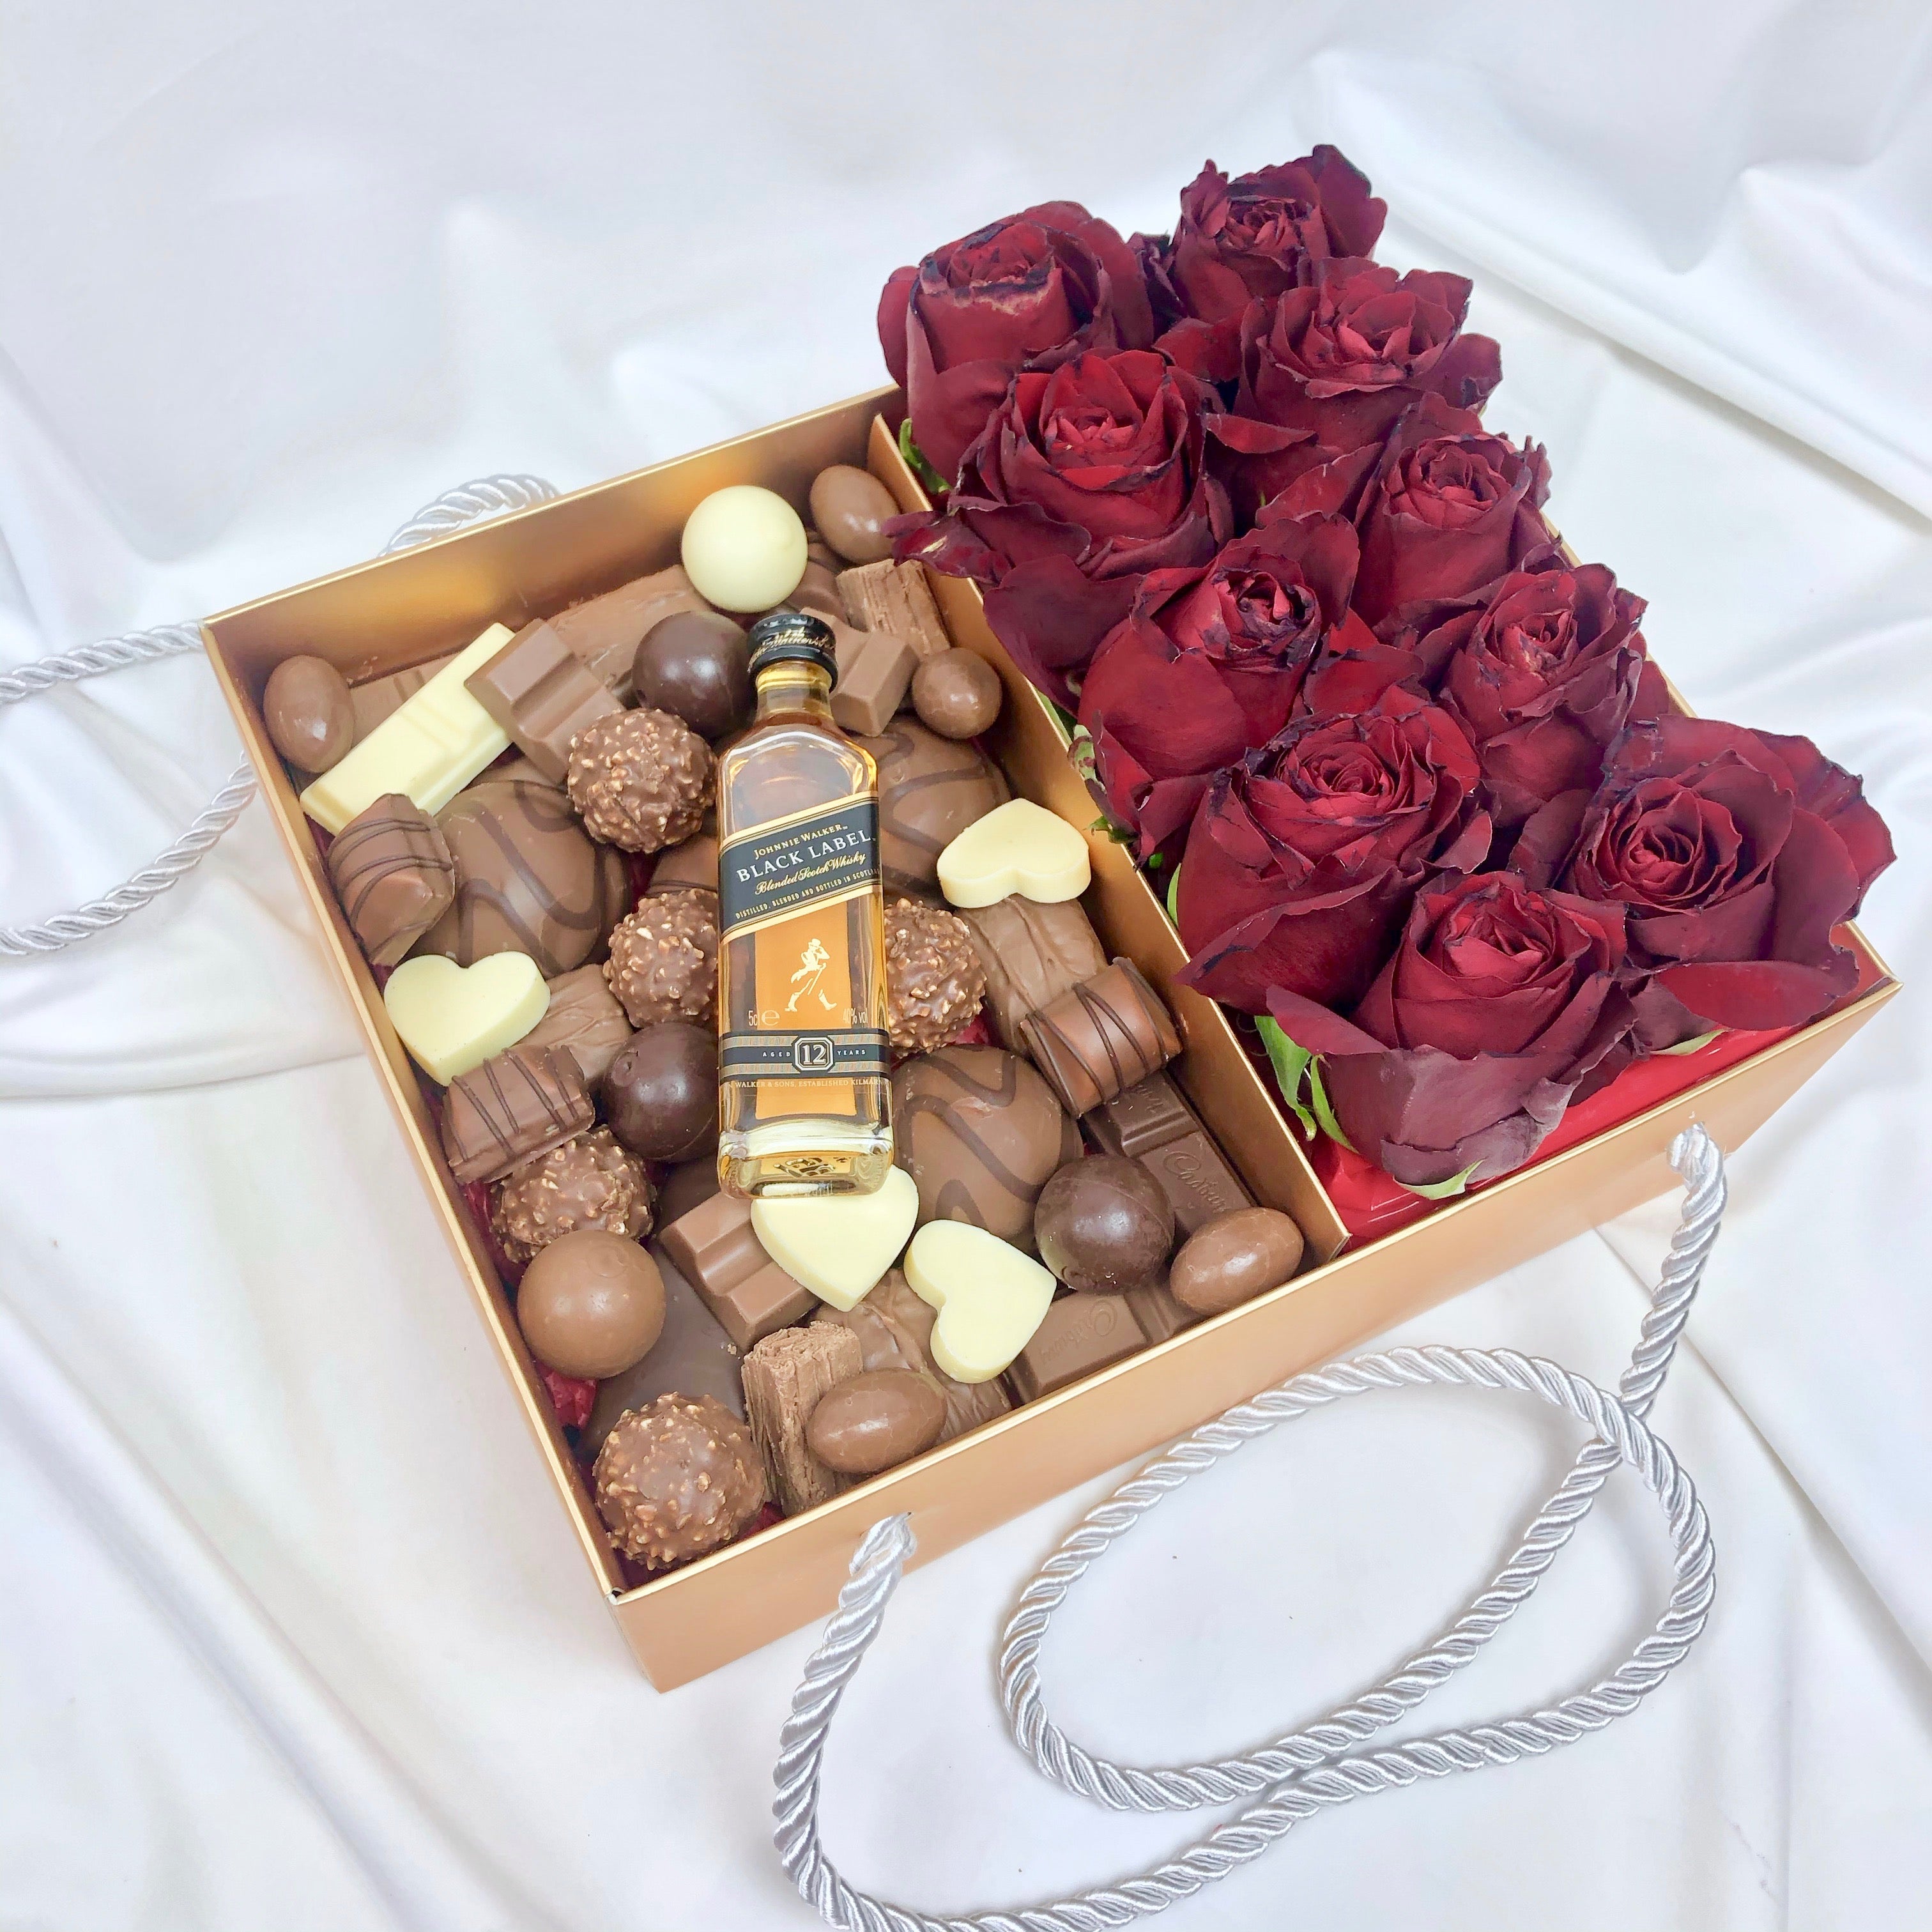 Chocolate Assortment & Roses Gift Hamper chocolate delivery Adelaide flowers delivered to Sandy birthday roses and chocolate gift basket